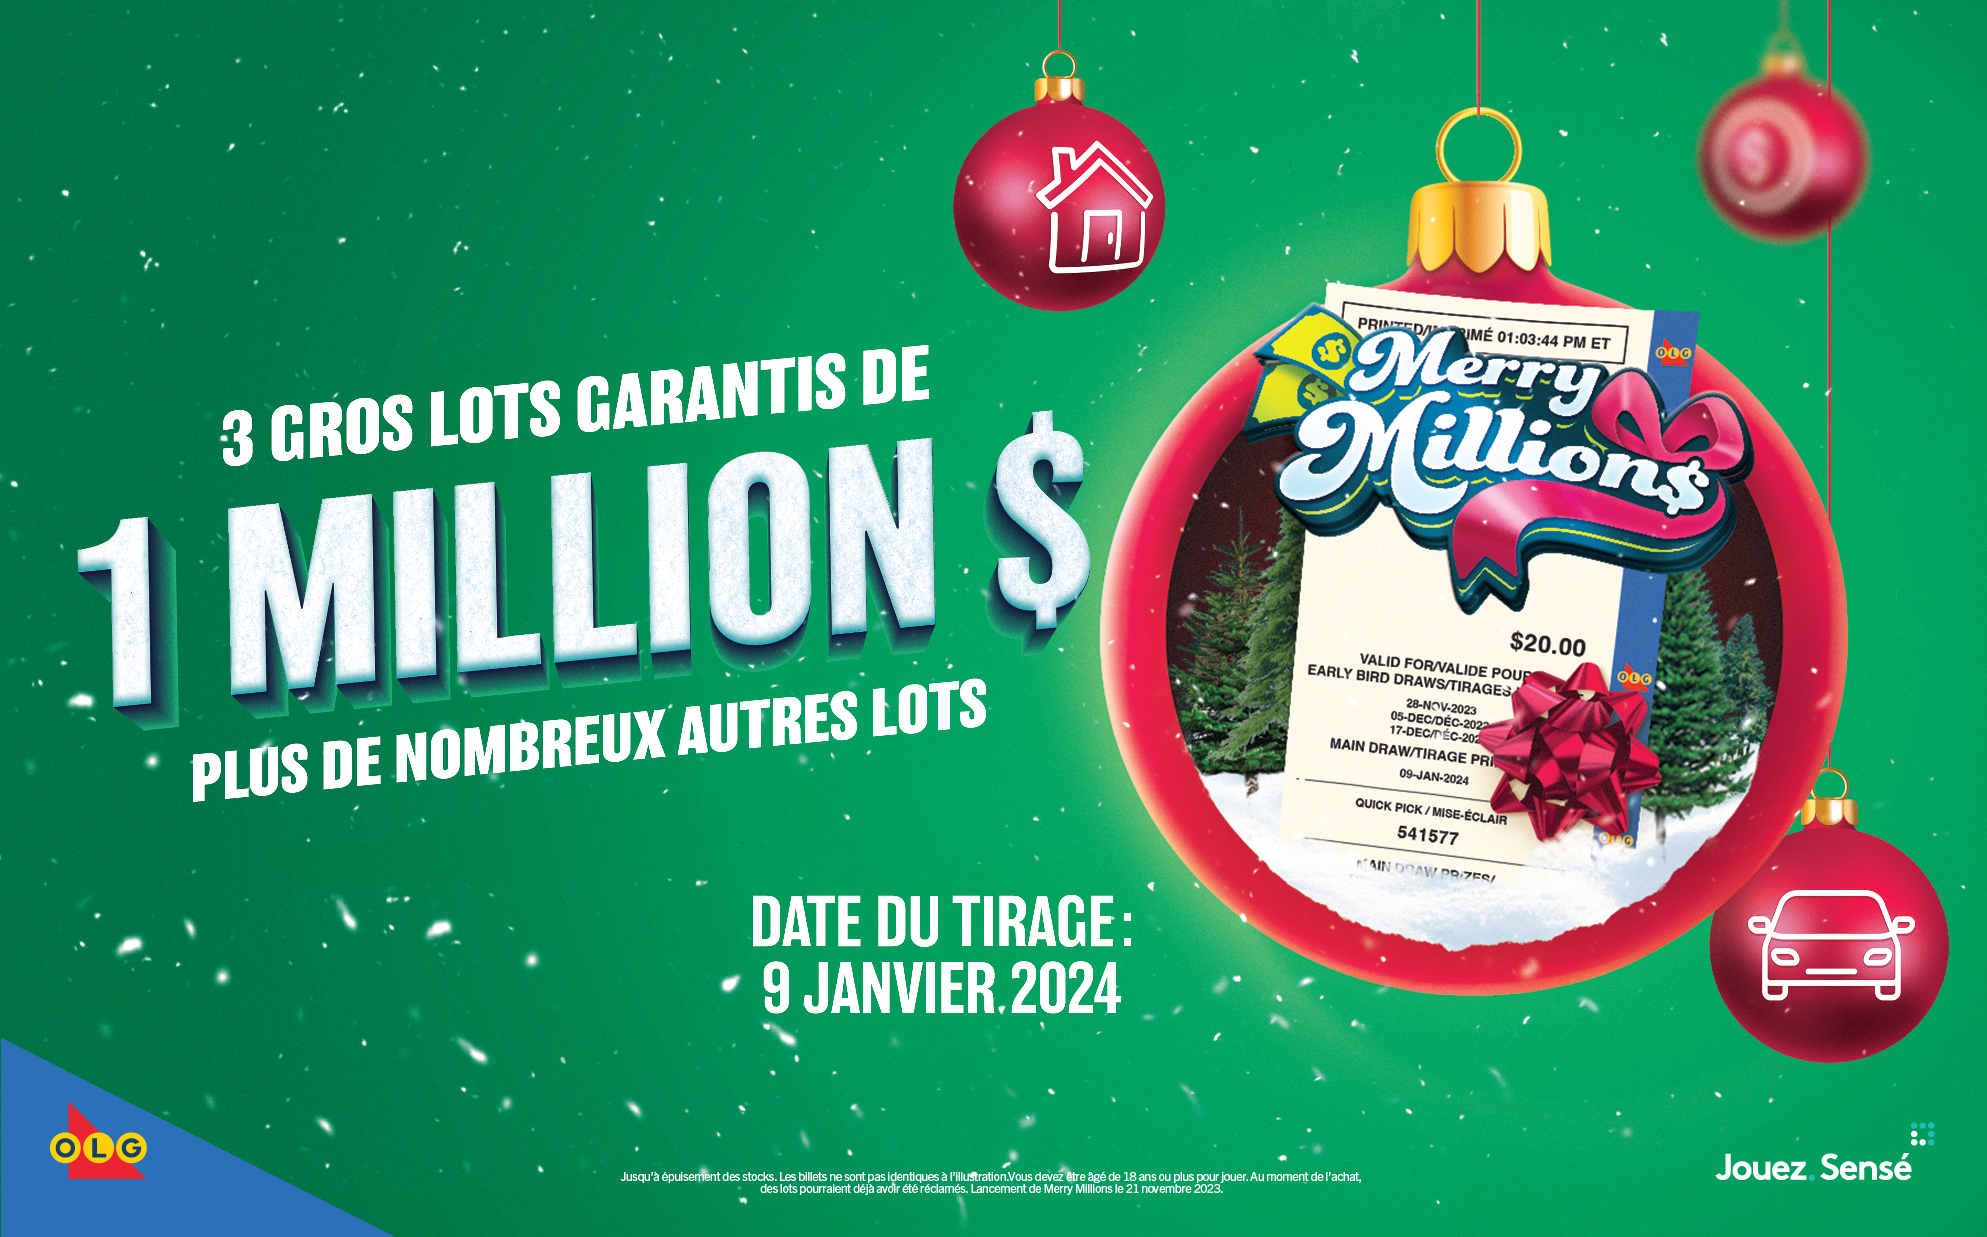 Merry Millions Lottery ticket promotion